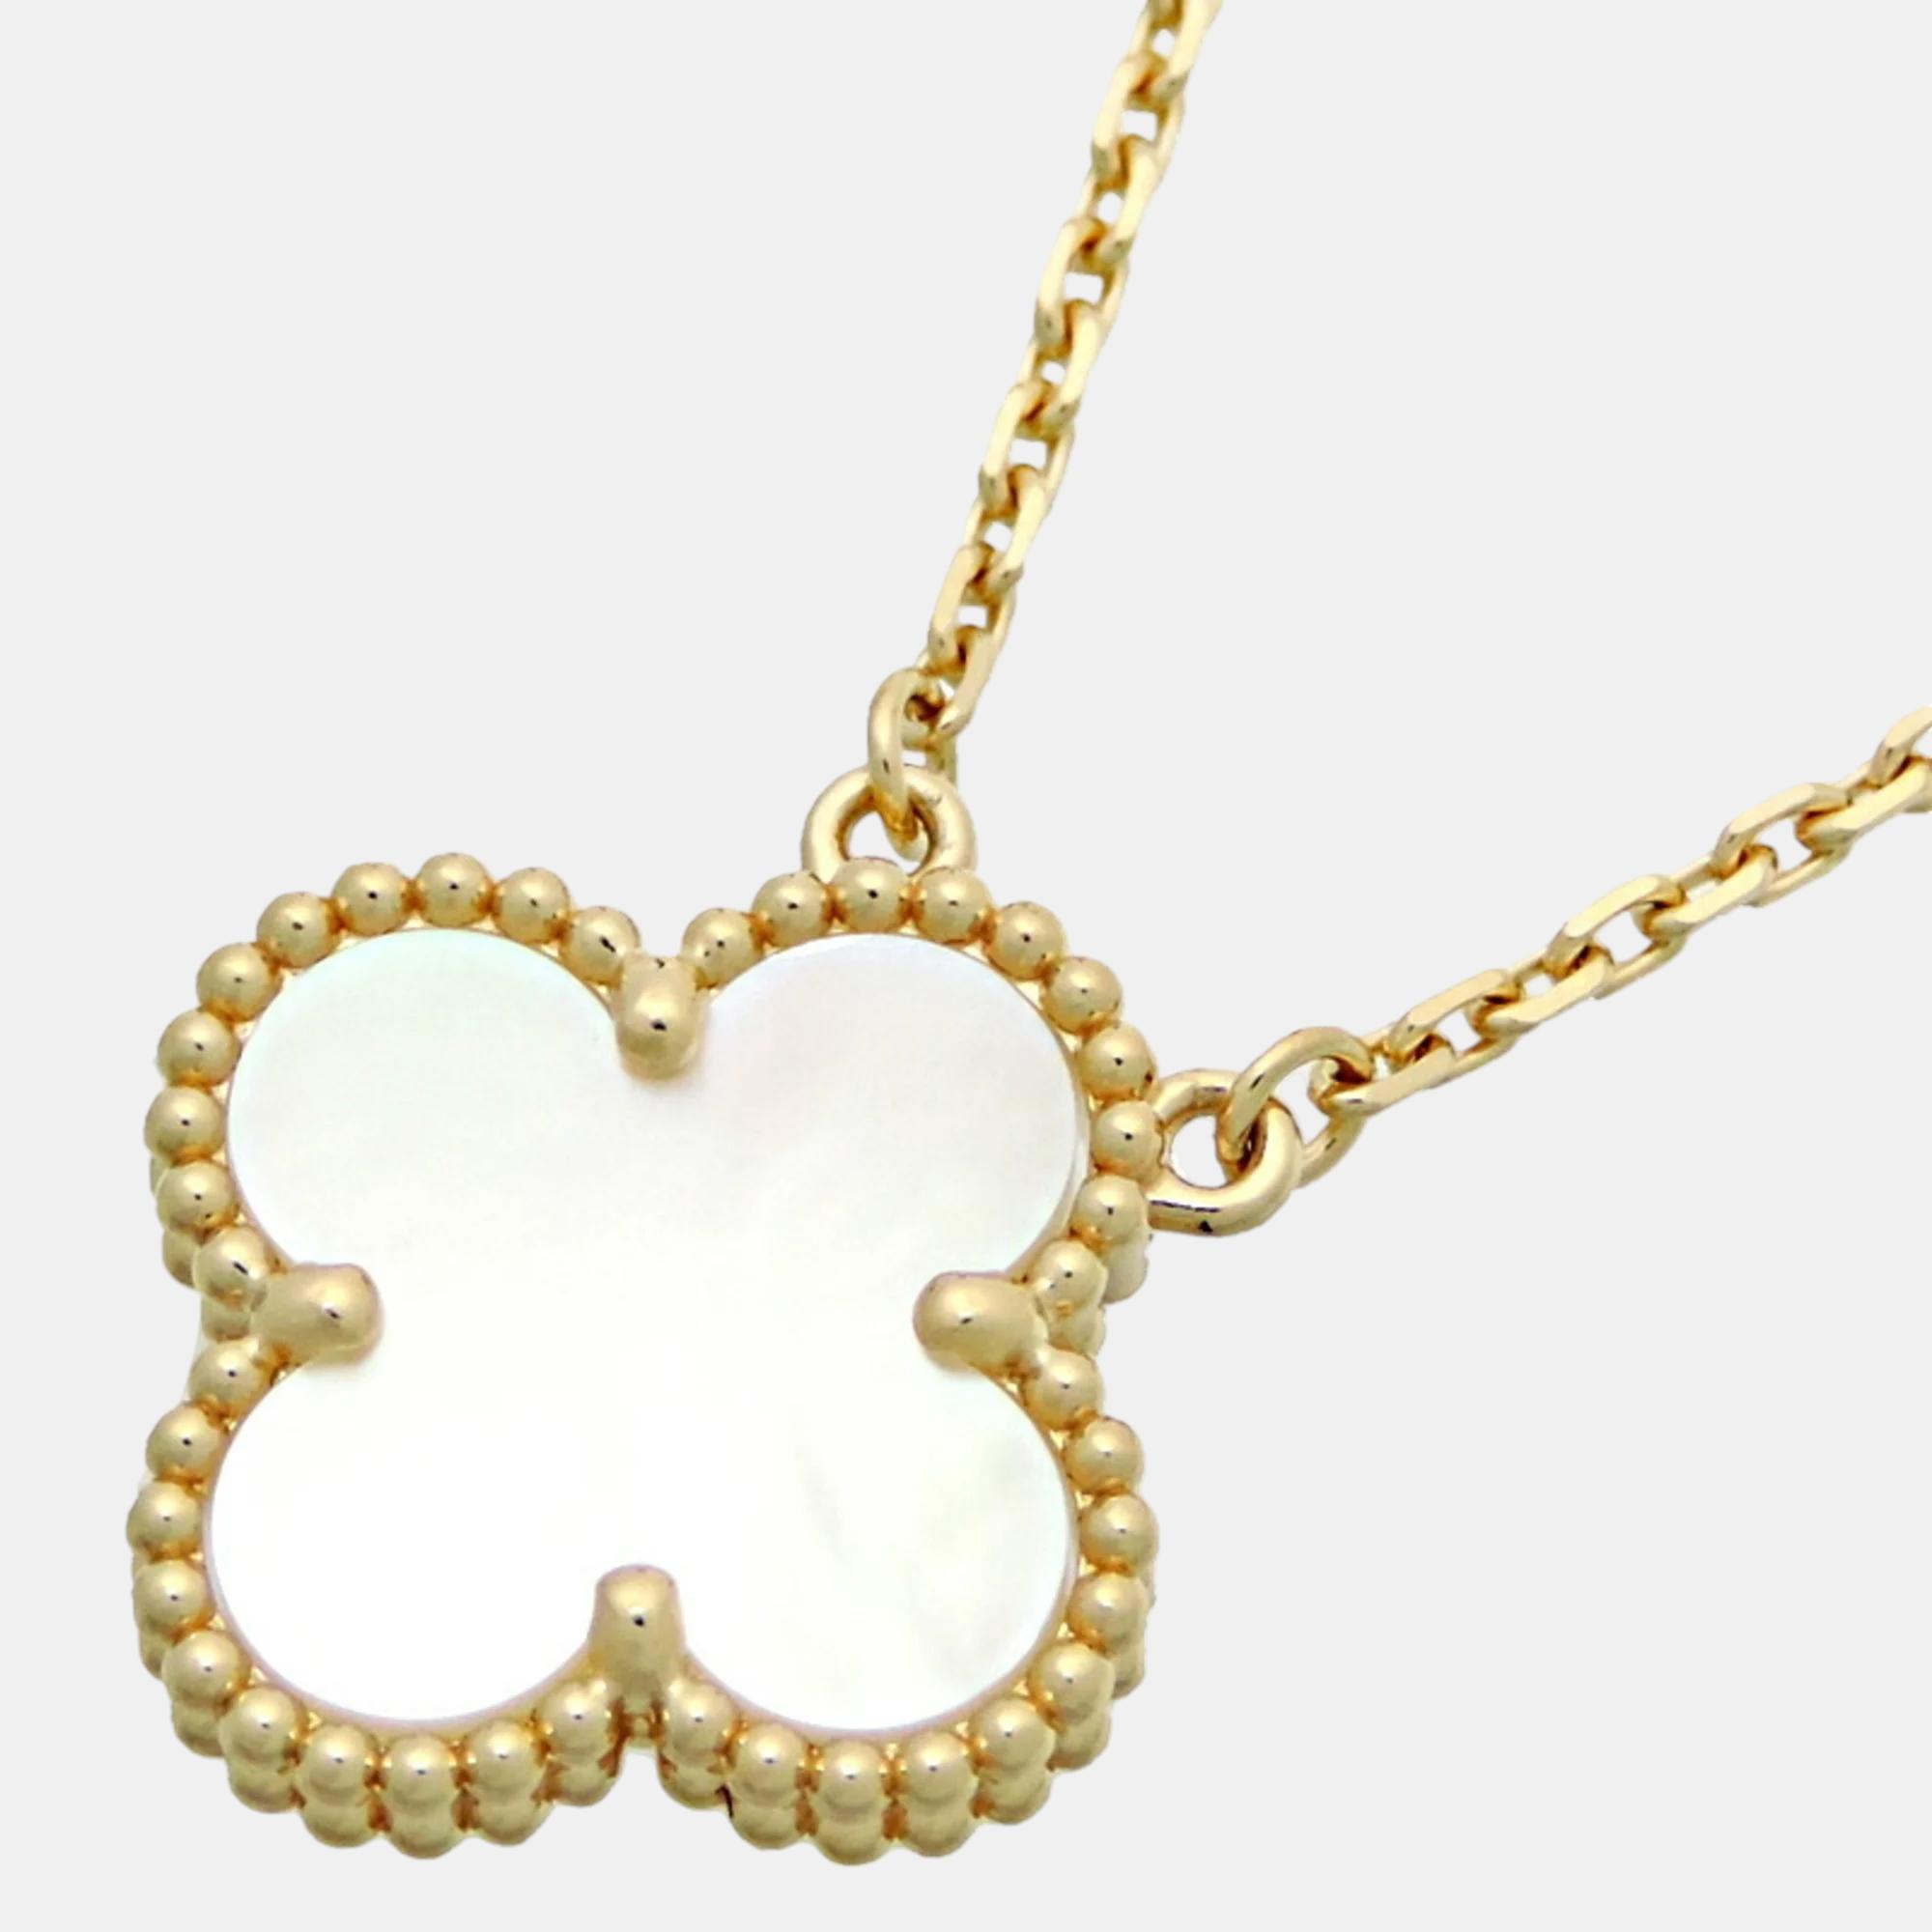 Van cleef & arpels vintage alhambra yellow gold, mother of pearl necklace